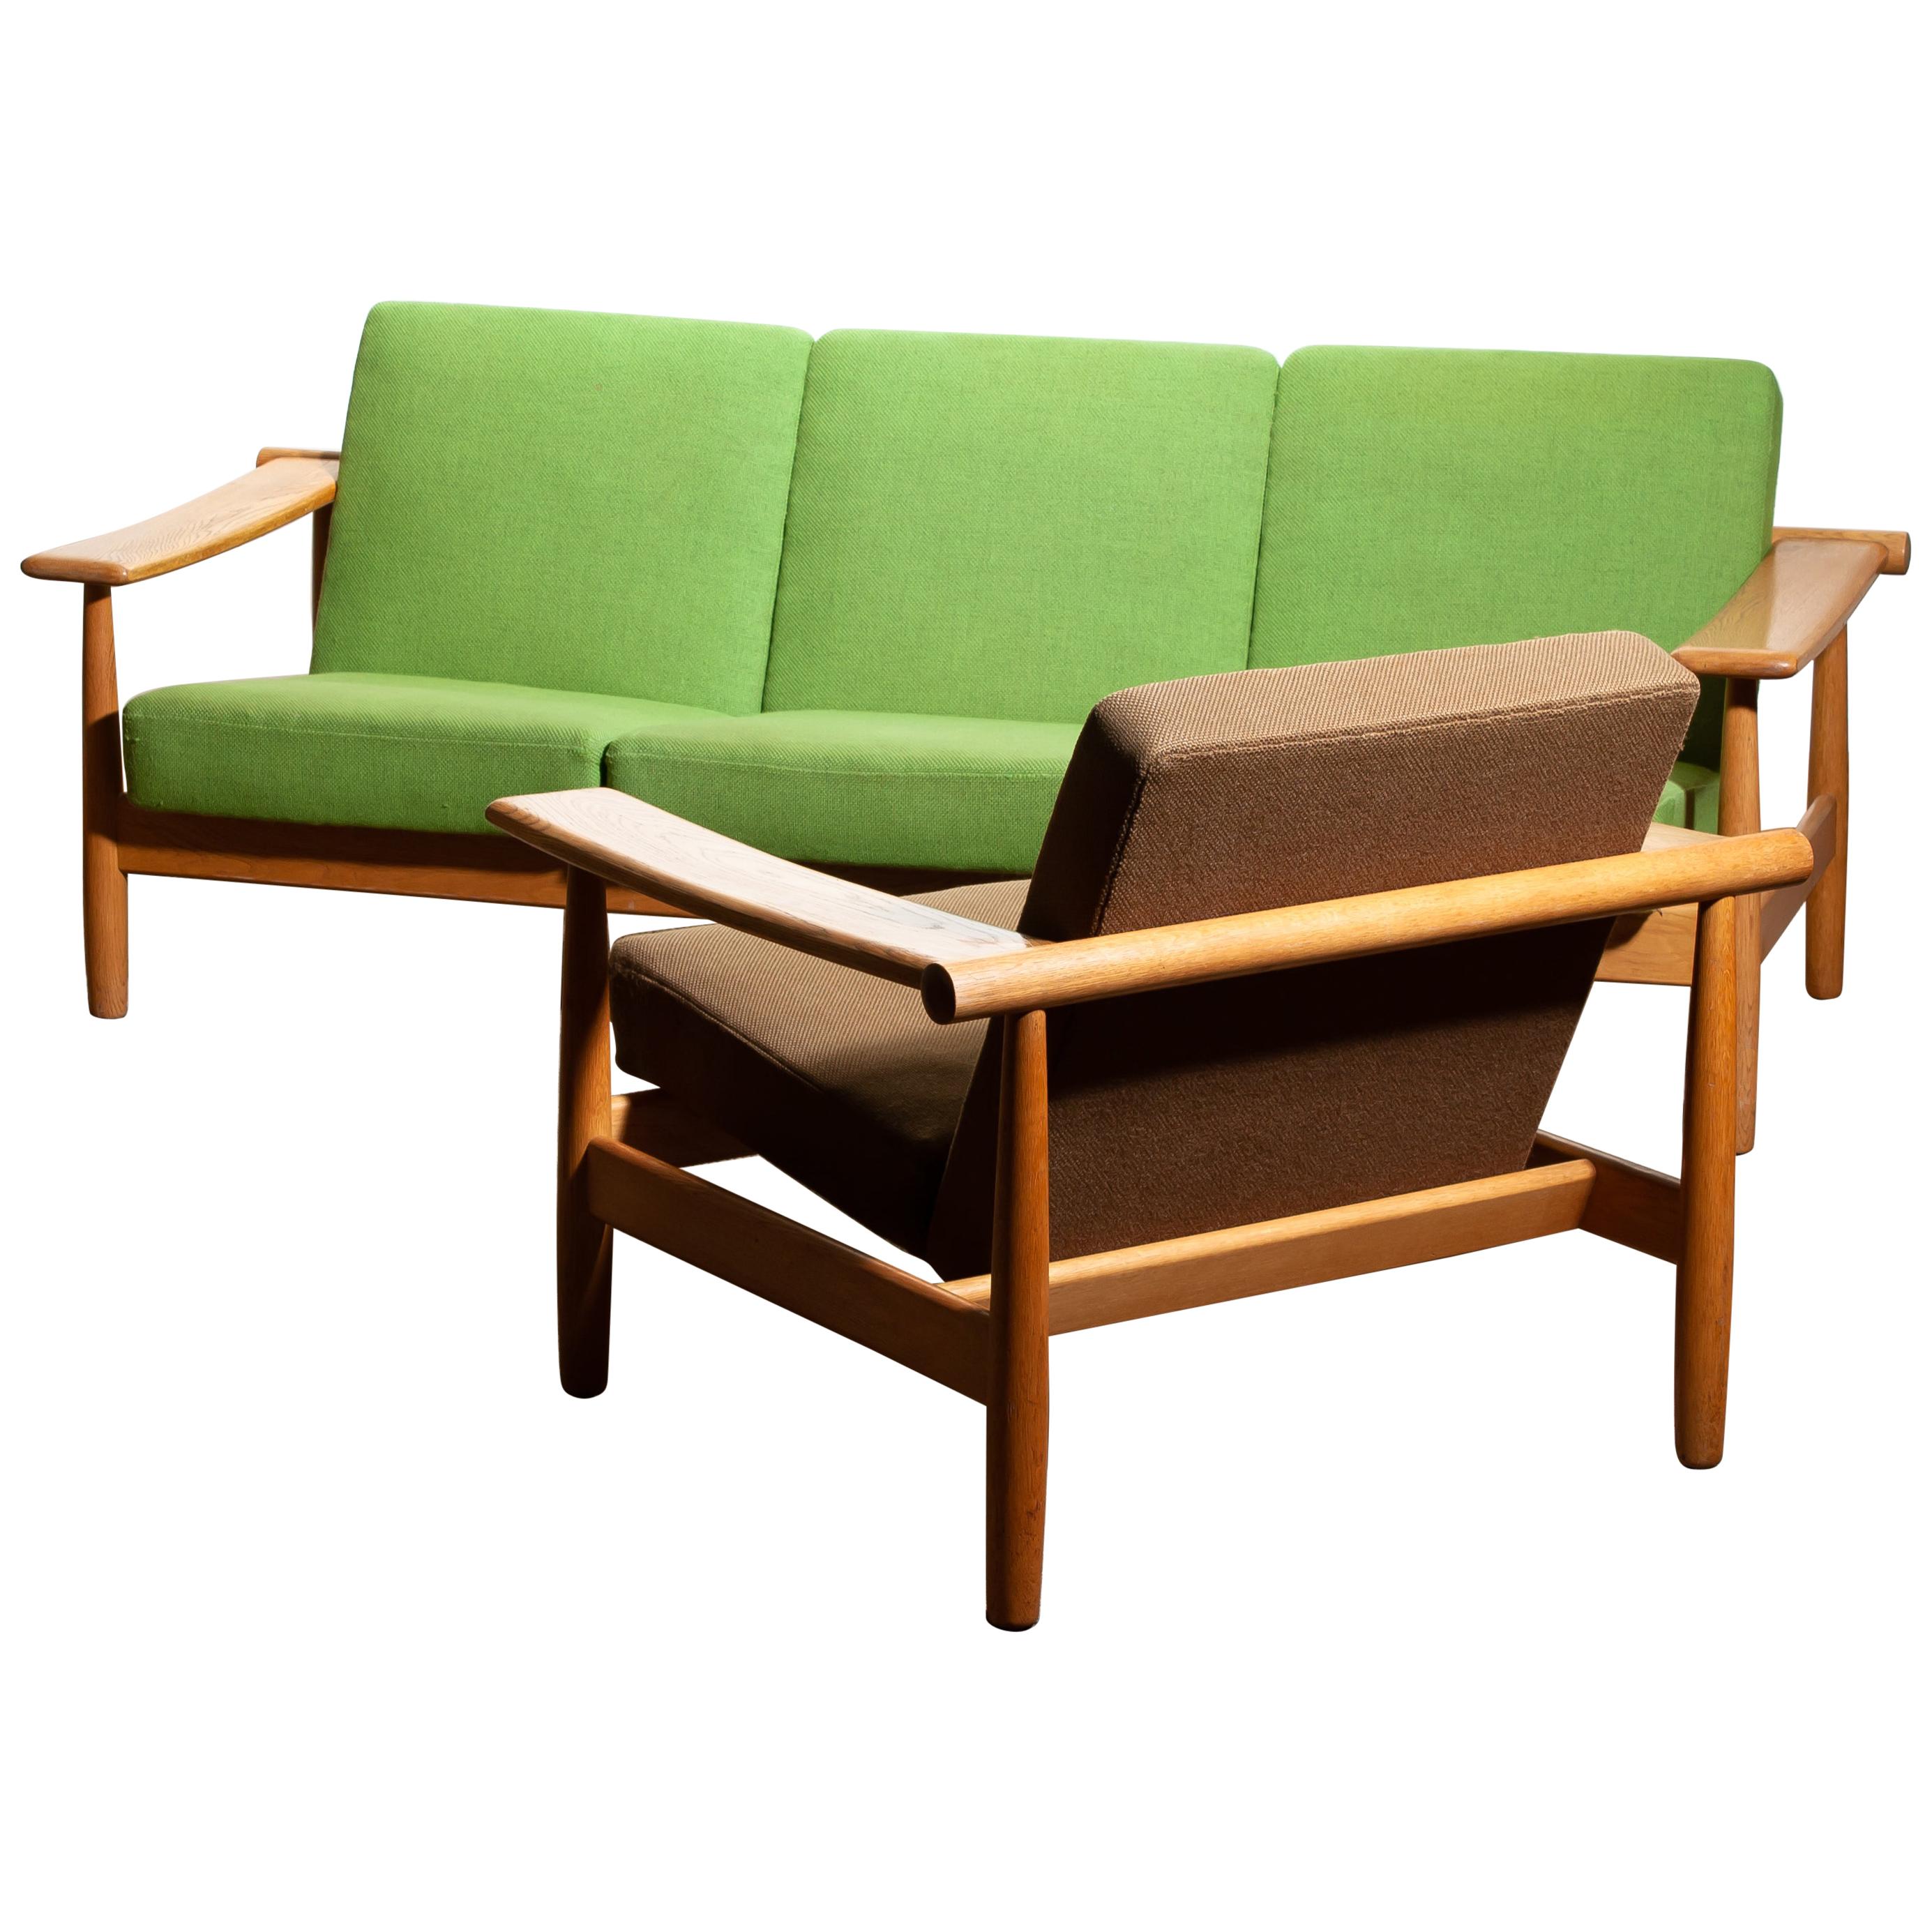 Beautiful oak sofa and lounge chair / living room set from the 1960s made in Denmark.
The oak frames are in good condition.
The fabric is in fair condition like the pictures shows.
Beautiful set!